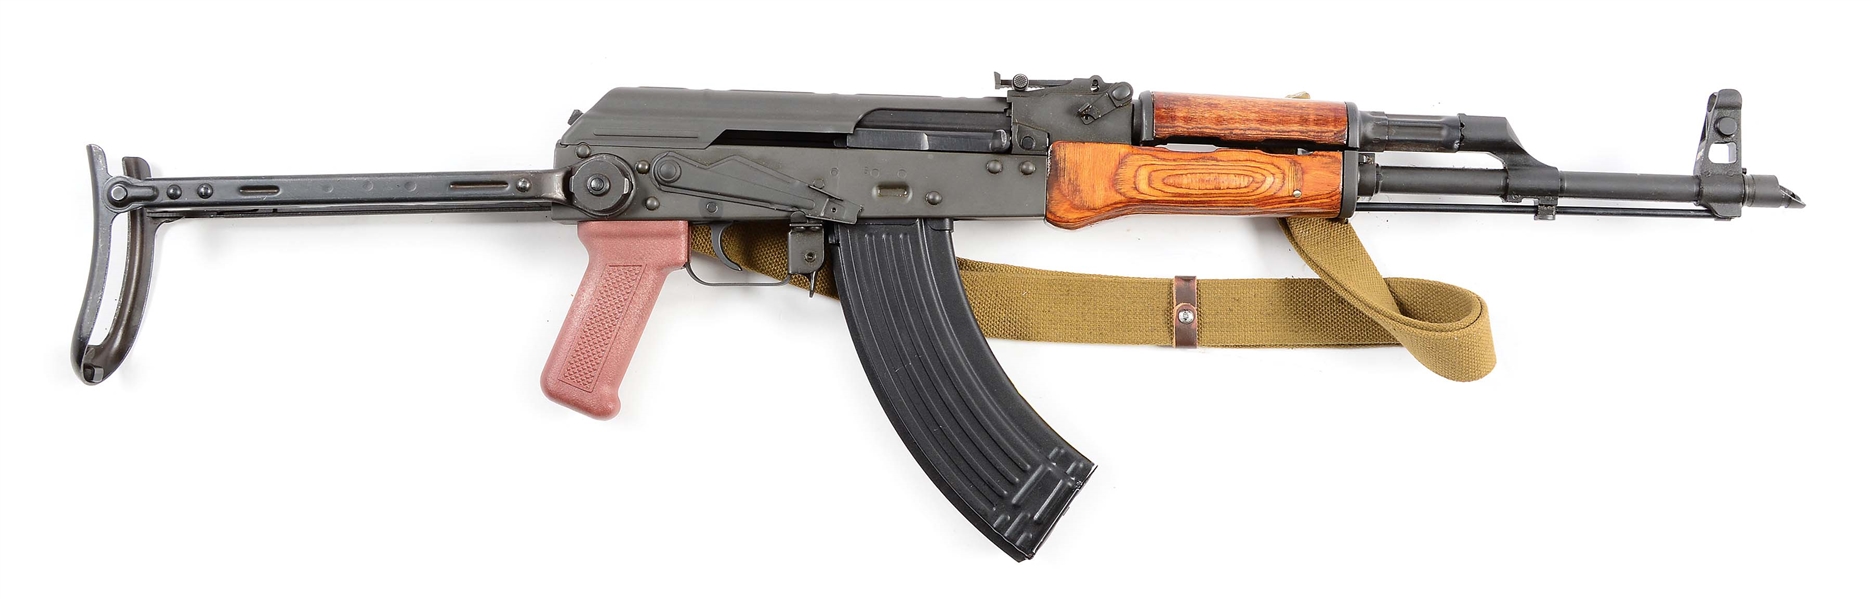 (M) UNDER FOLDER ITM ARMS CLEVELAND, OH MADE MK 98 AK-74 SEMI-AUTOMATIC RIFLE.